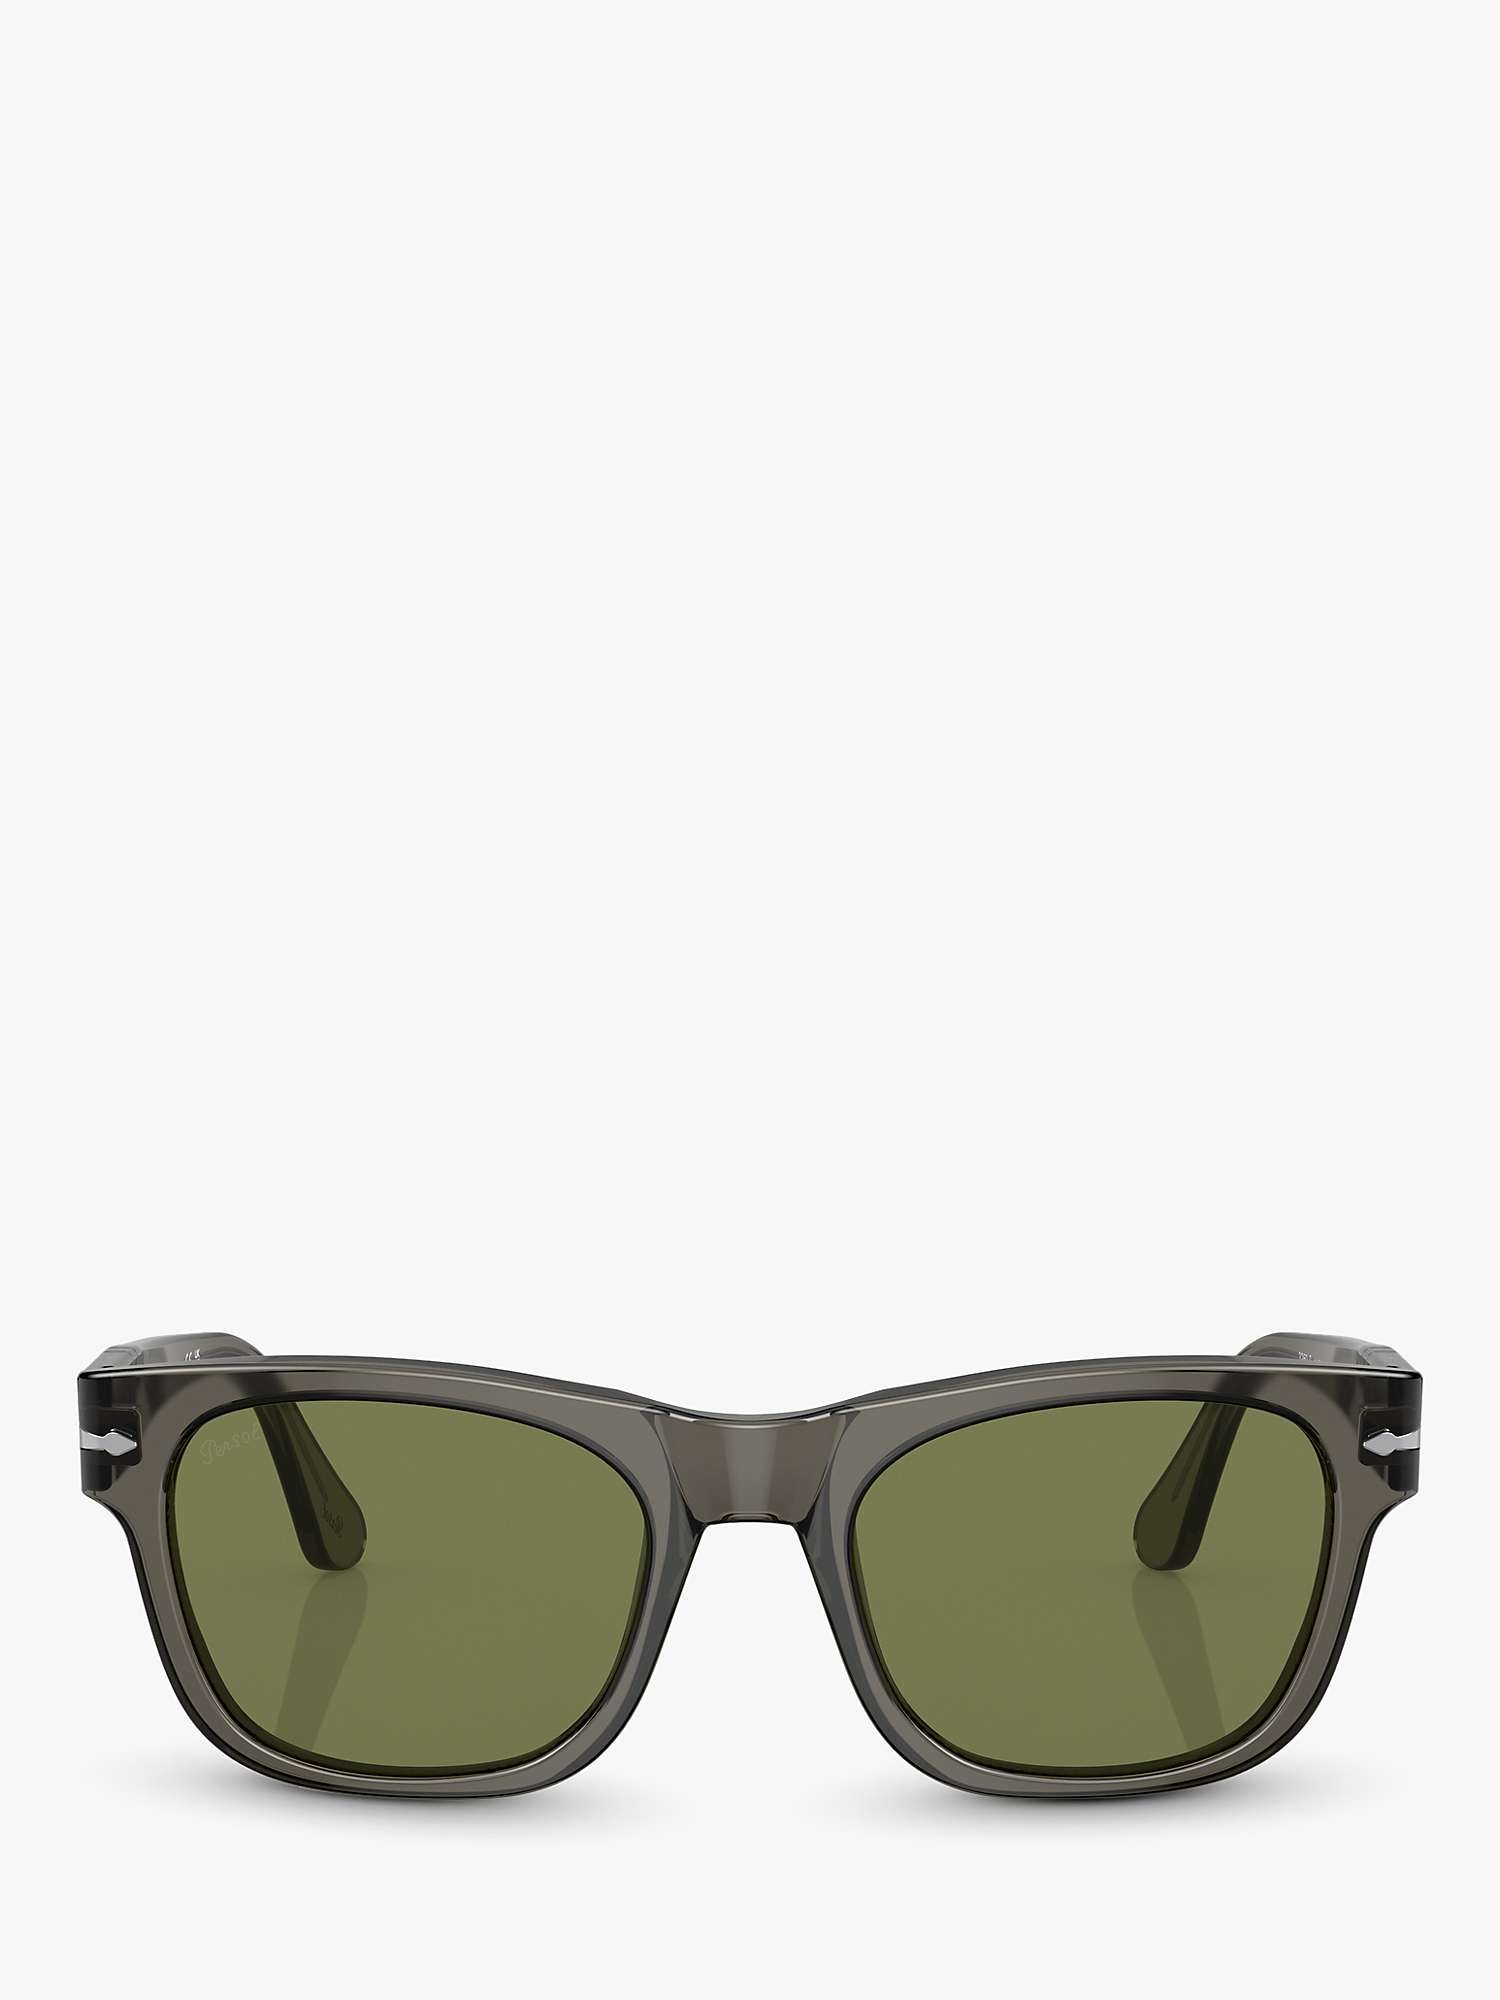 Buy Persol PO3269S Unisex D-Frame Sunglasses, Opal Smoke/Green Online at johnlewis.com